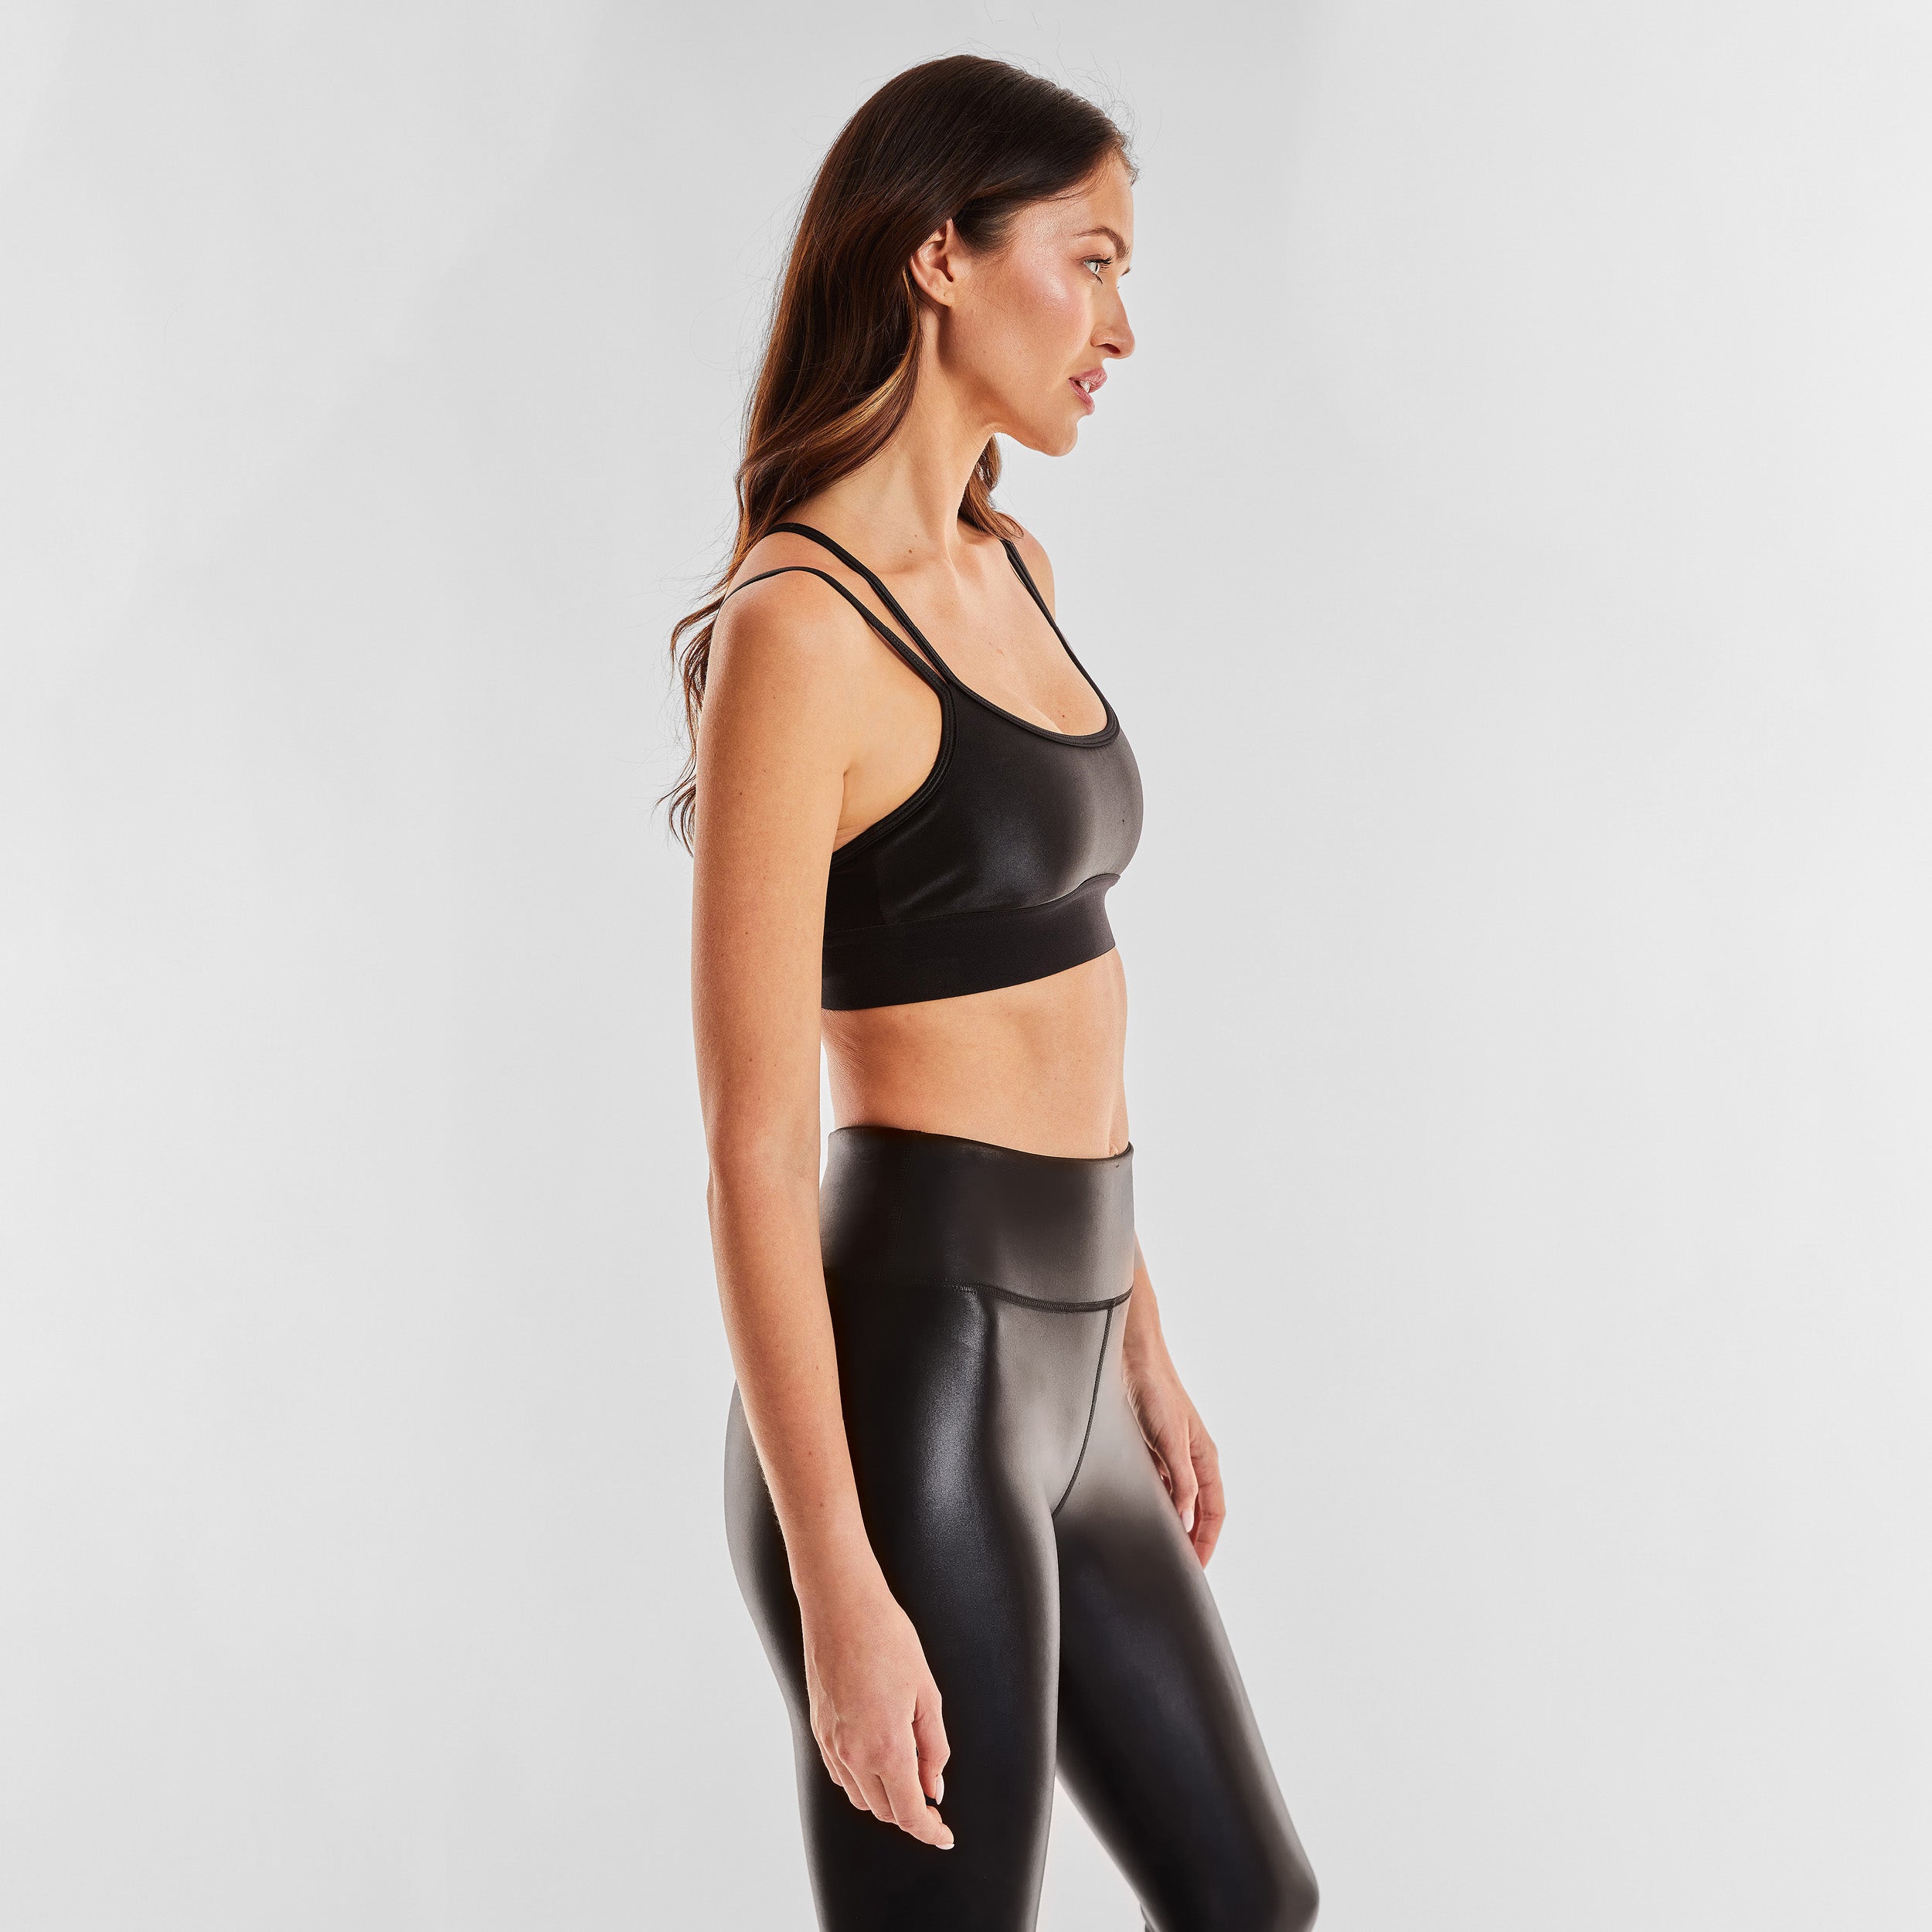 Side view of woman wearing black gloss liquid sports bra featuring a scoop neckline and an alluring strappy back with a supportive elastic band